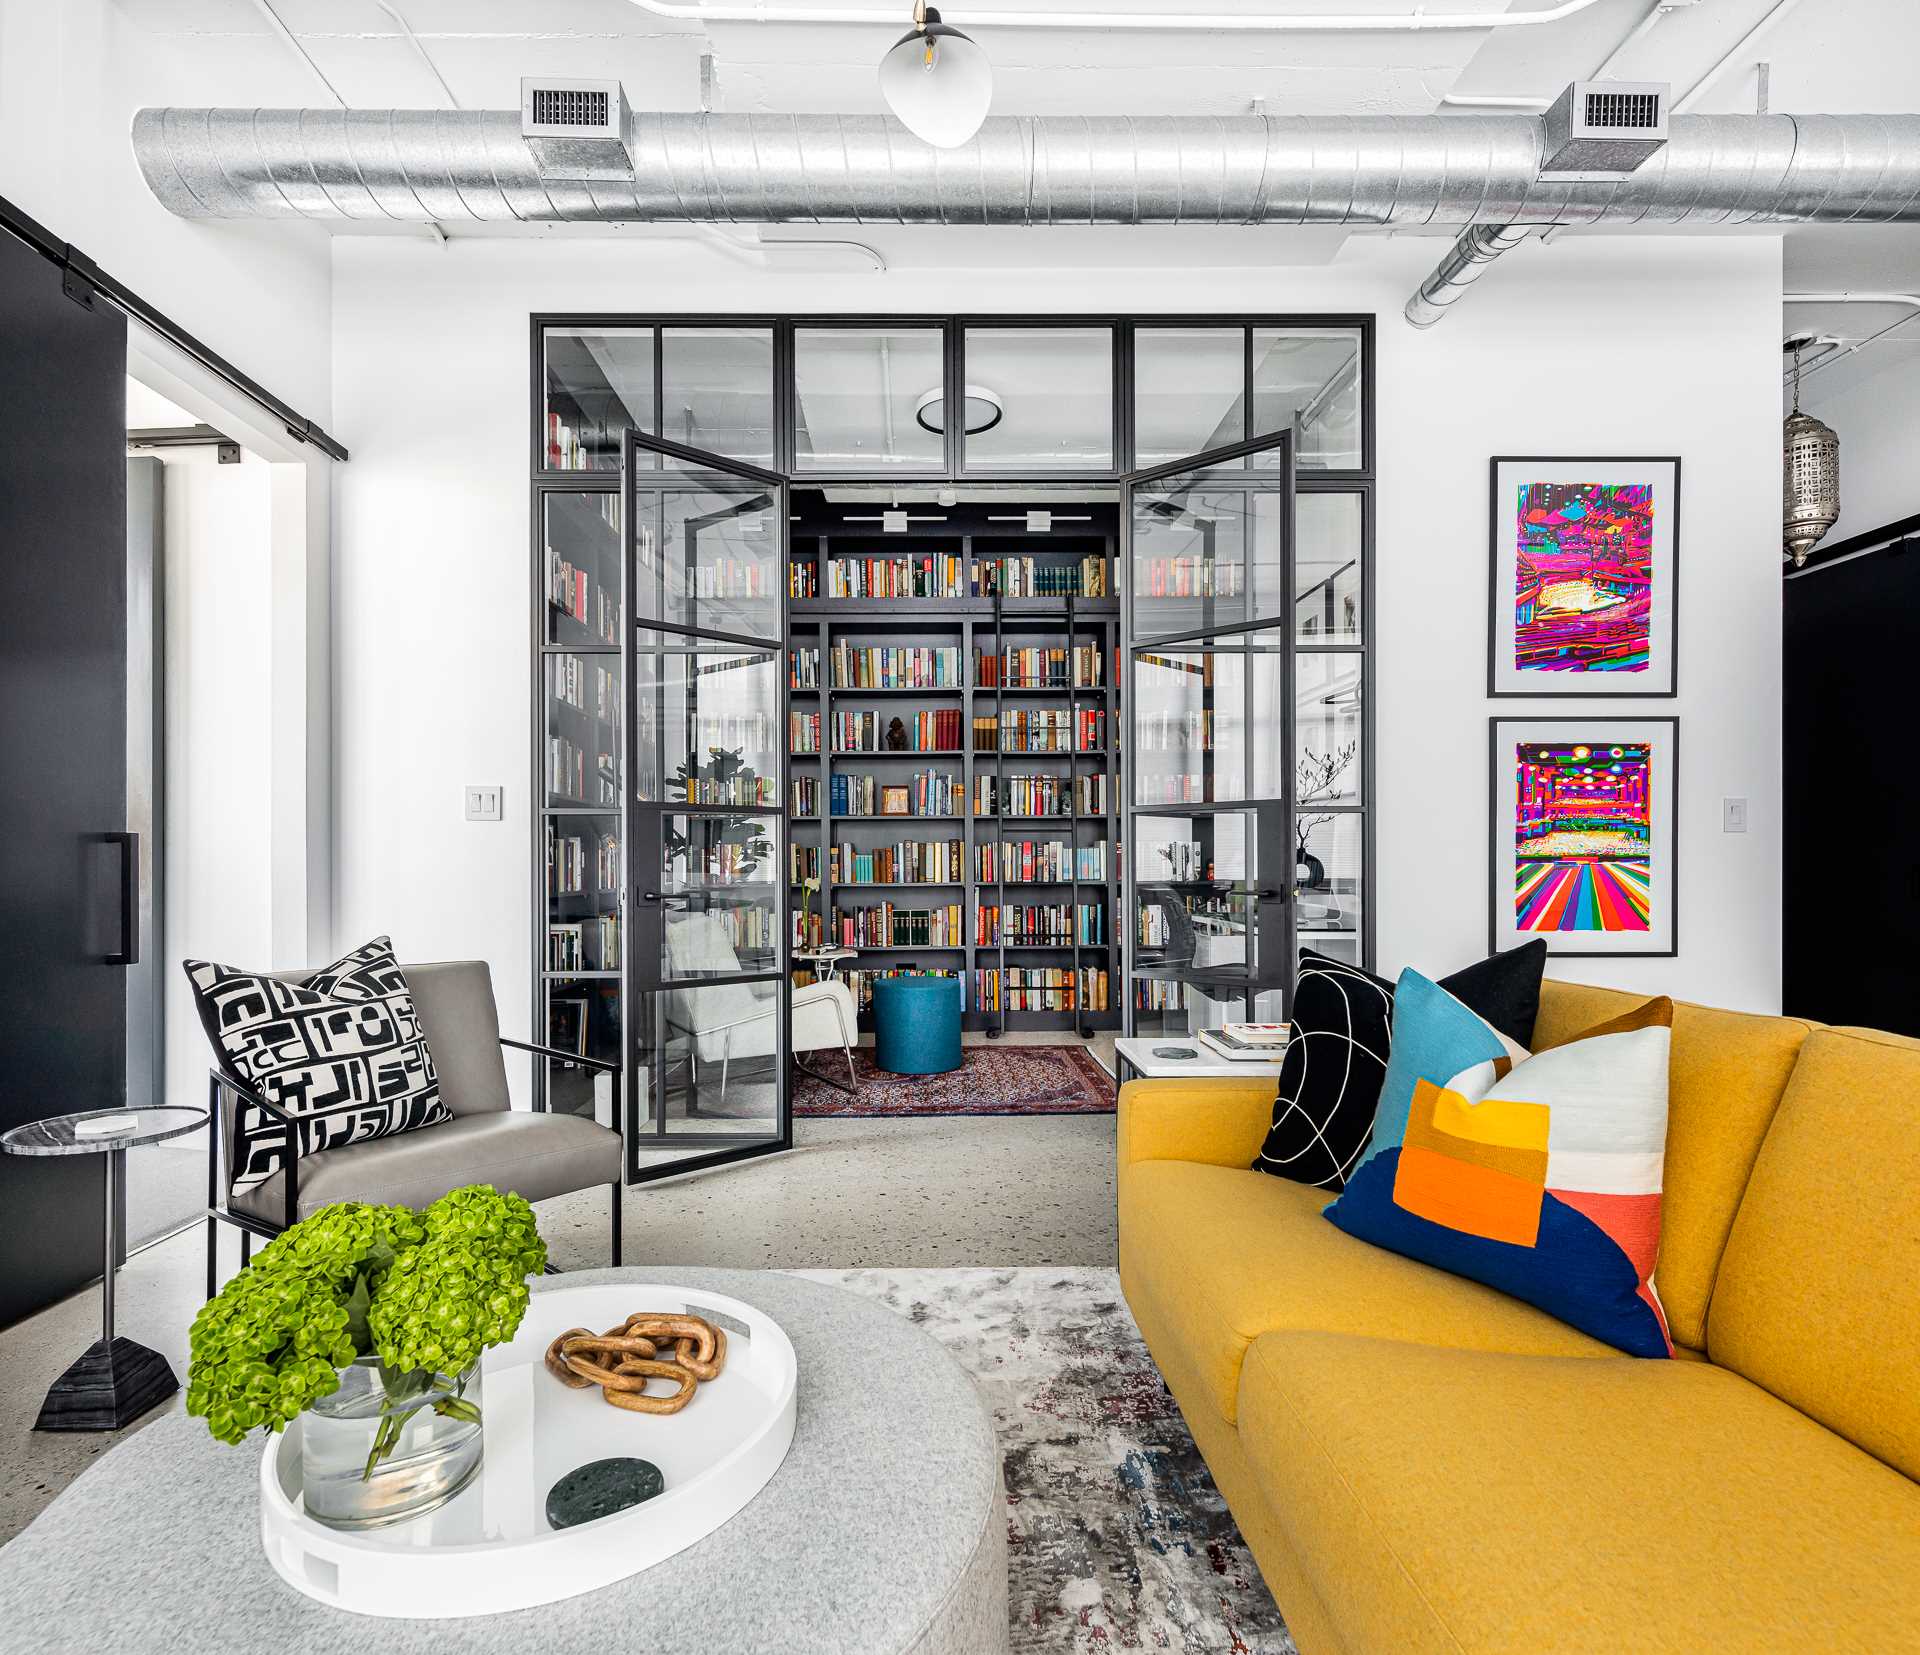 A modern home library in a loft apartment, is enclosed behind a glass wall, has custom black shelving and a ladder to reach the upper shelves.